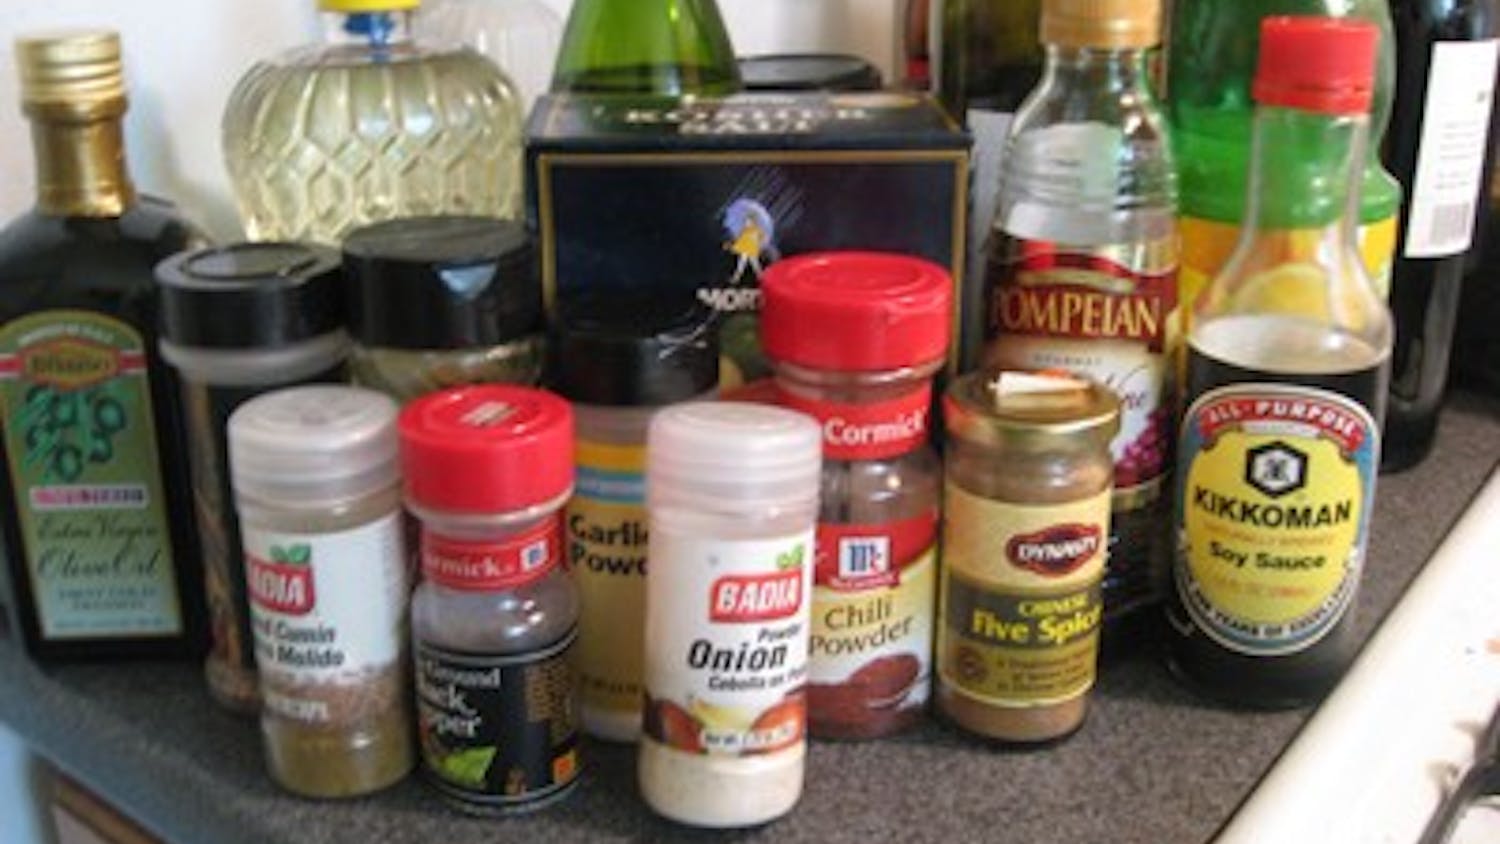 SPICE WORLD â€” The key to making a good meal lies in proper materials, and the right array of oils and spices can save a dish. Itâ€™s more important to have the essentials rather than an overstuffed spice rack.